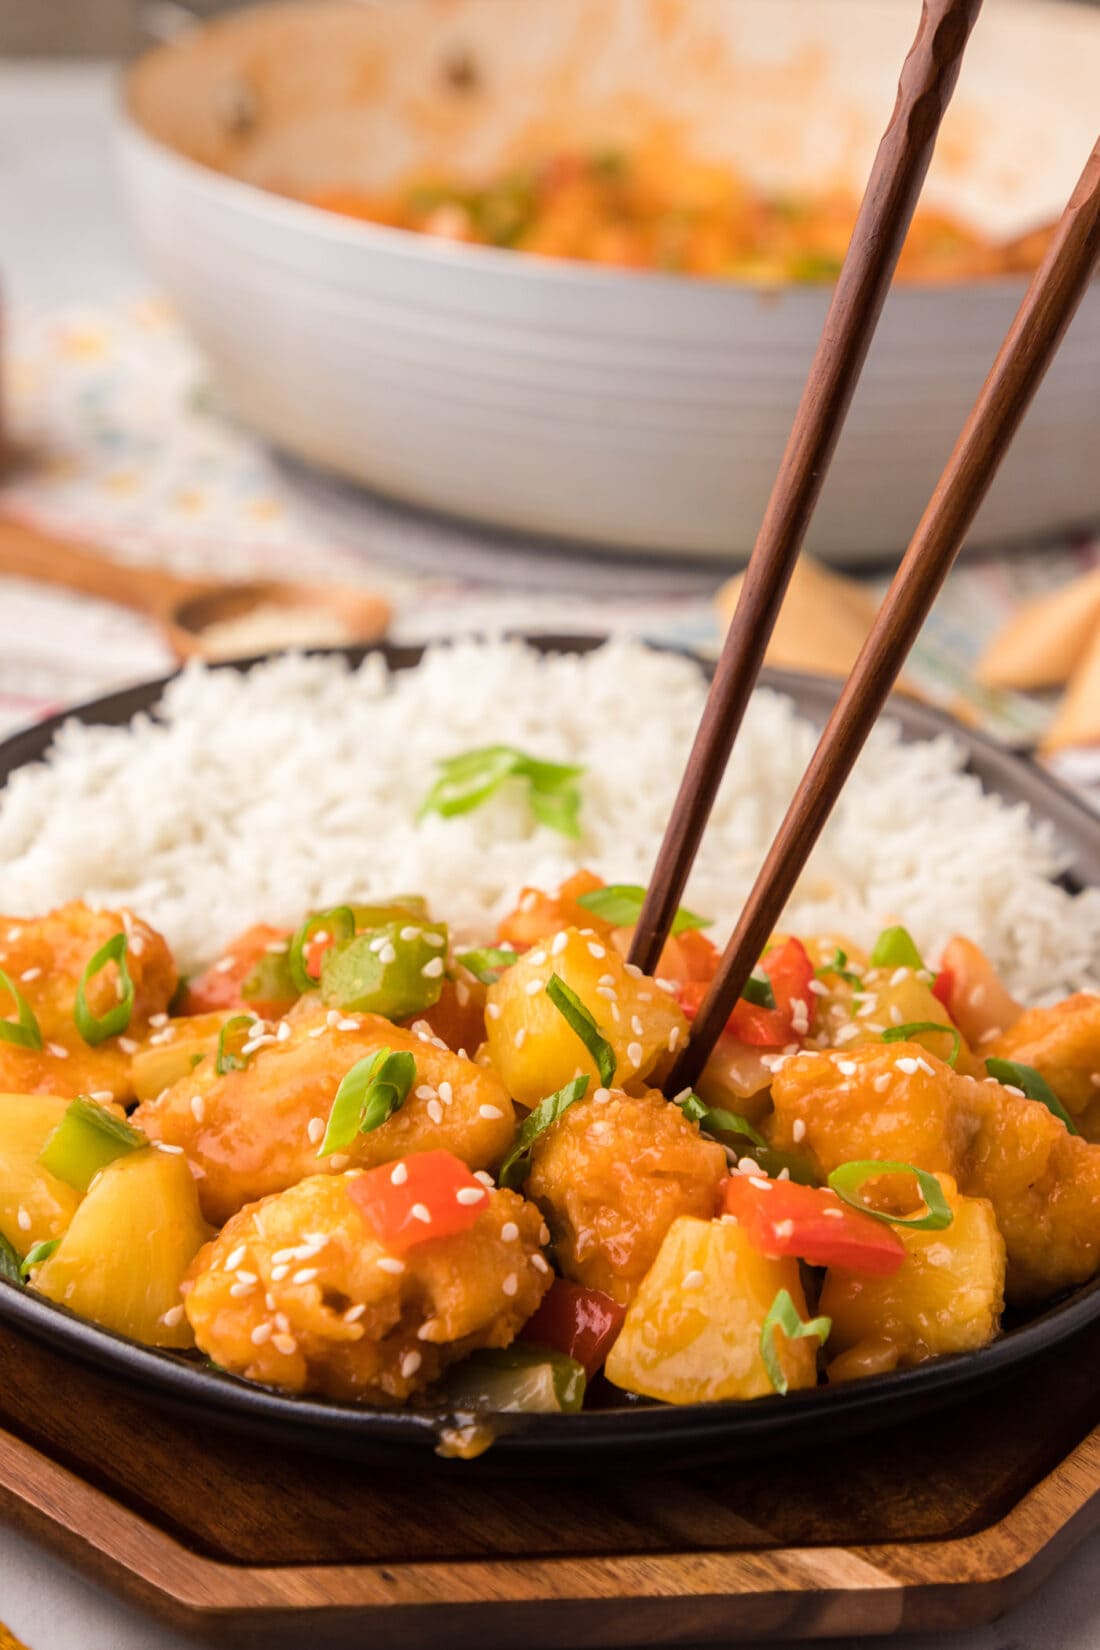 Chopsticks grabbing a piece of pineapple from a plate of Sweet and Sour Chicken with rice